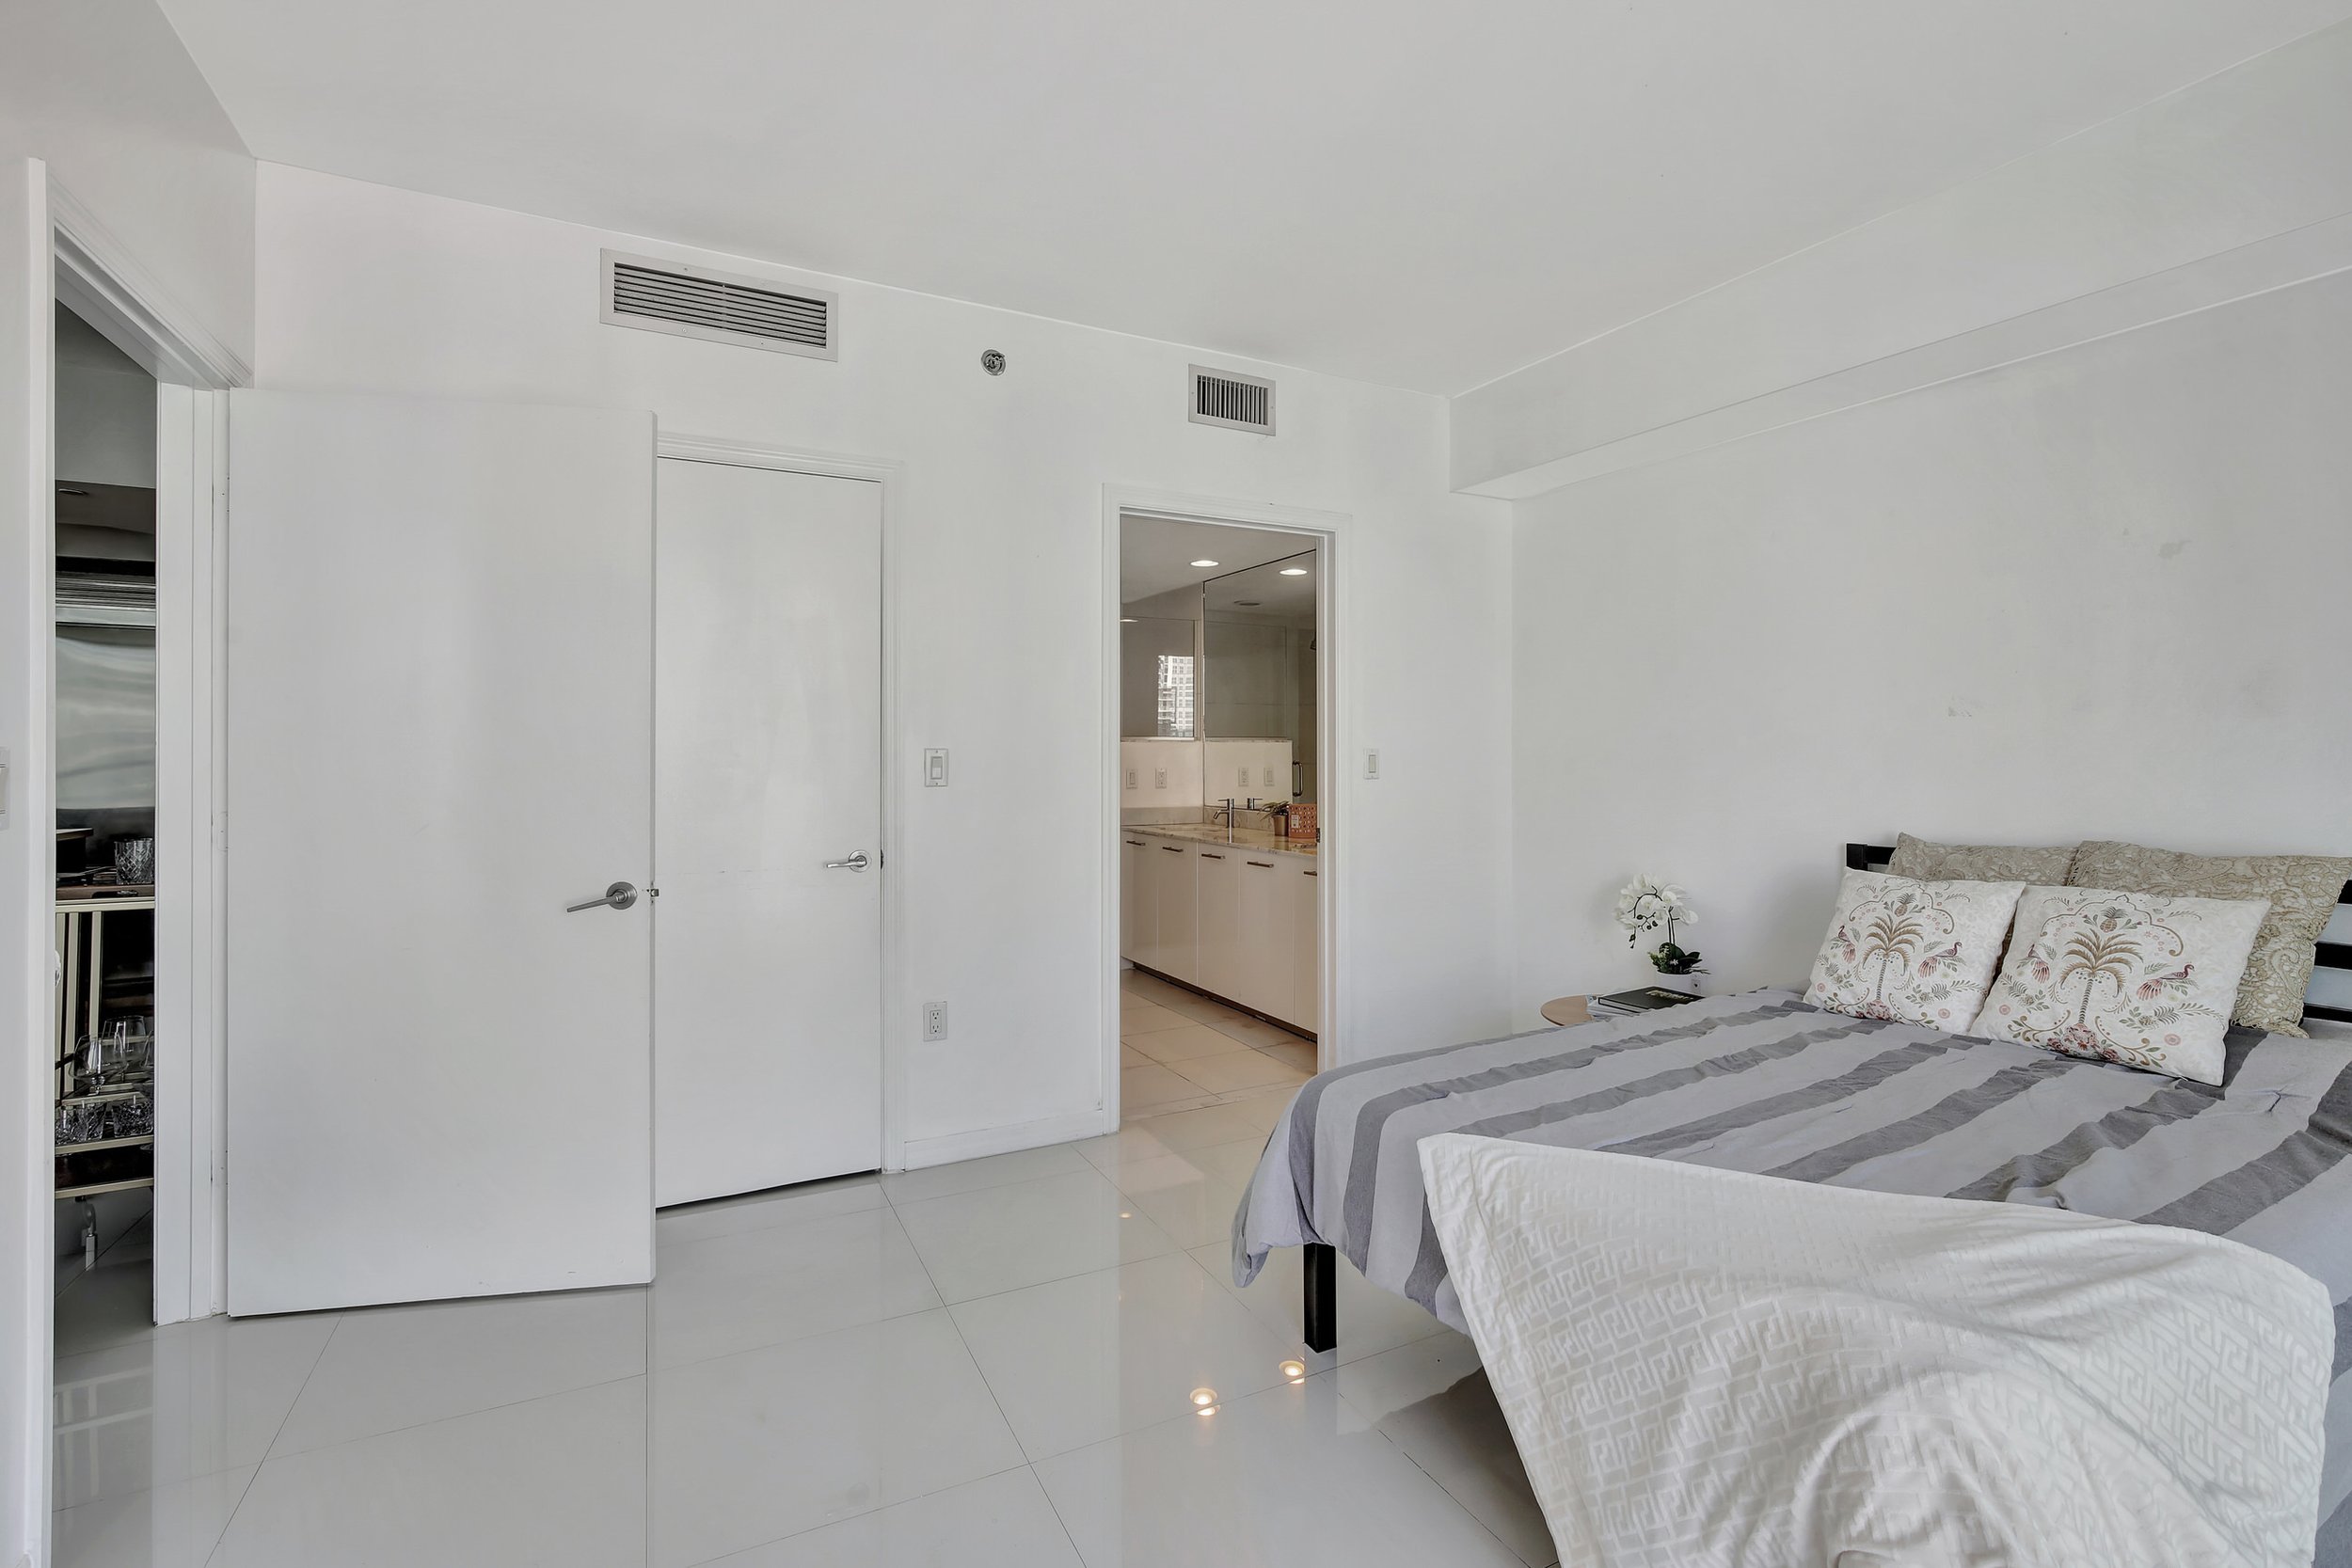 Check Out This Two-Bedroom Condo For Under $900K In Brickell 4.jpg